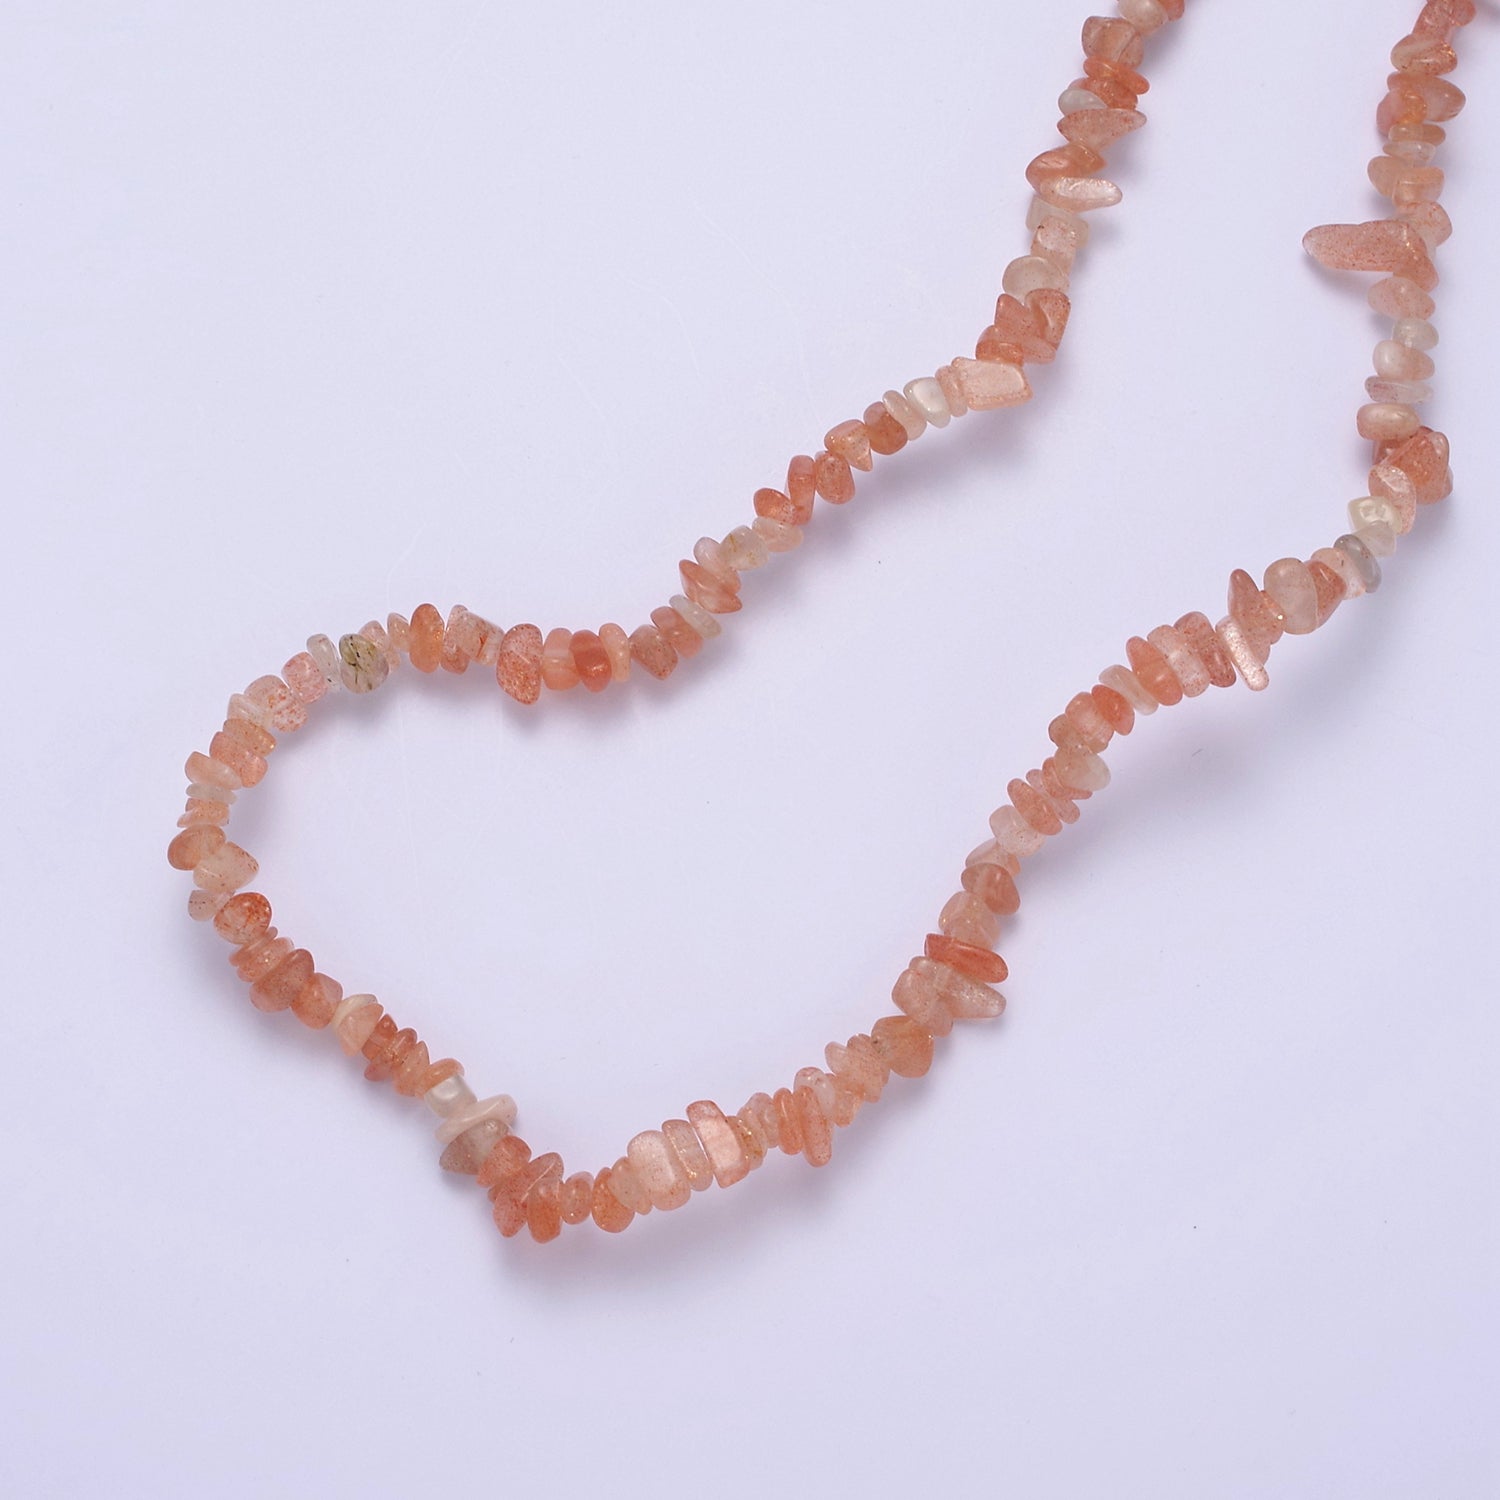 18.2 Inch Natural Orange Carnelian Crystal Stone Bead Necklace with 2" Extender WA-638 - DLUXCA